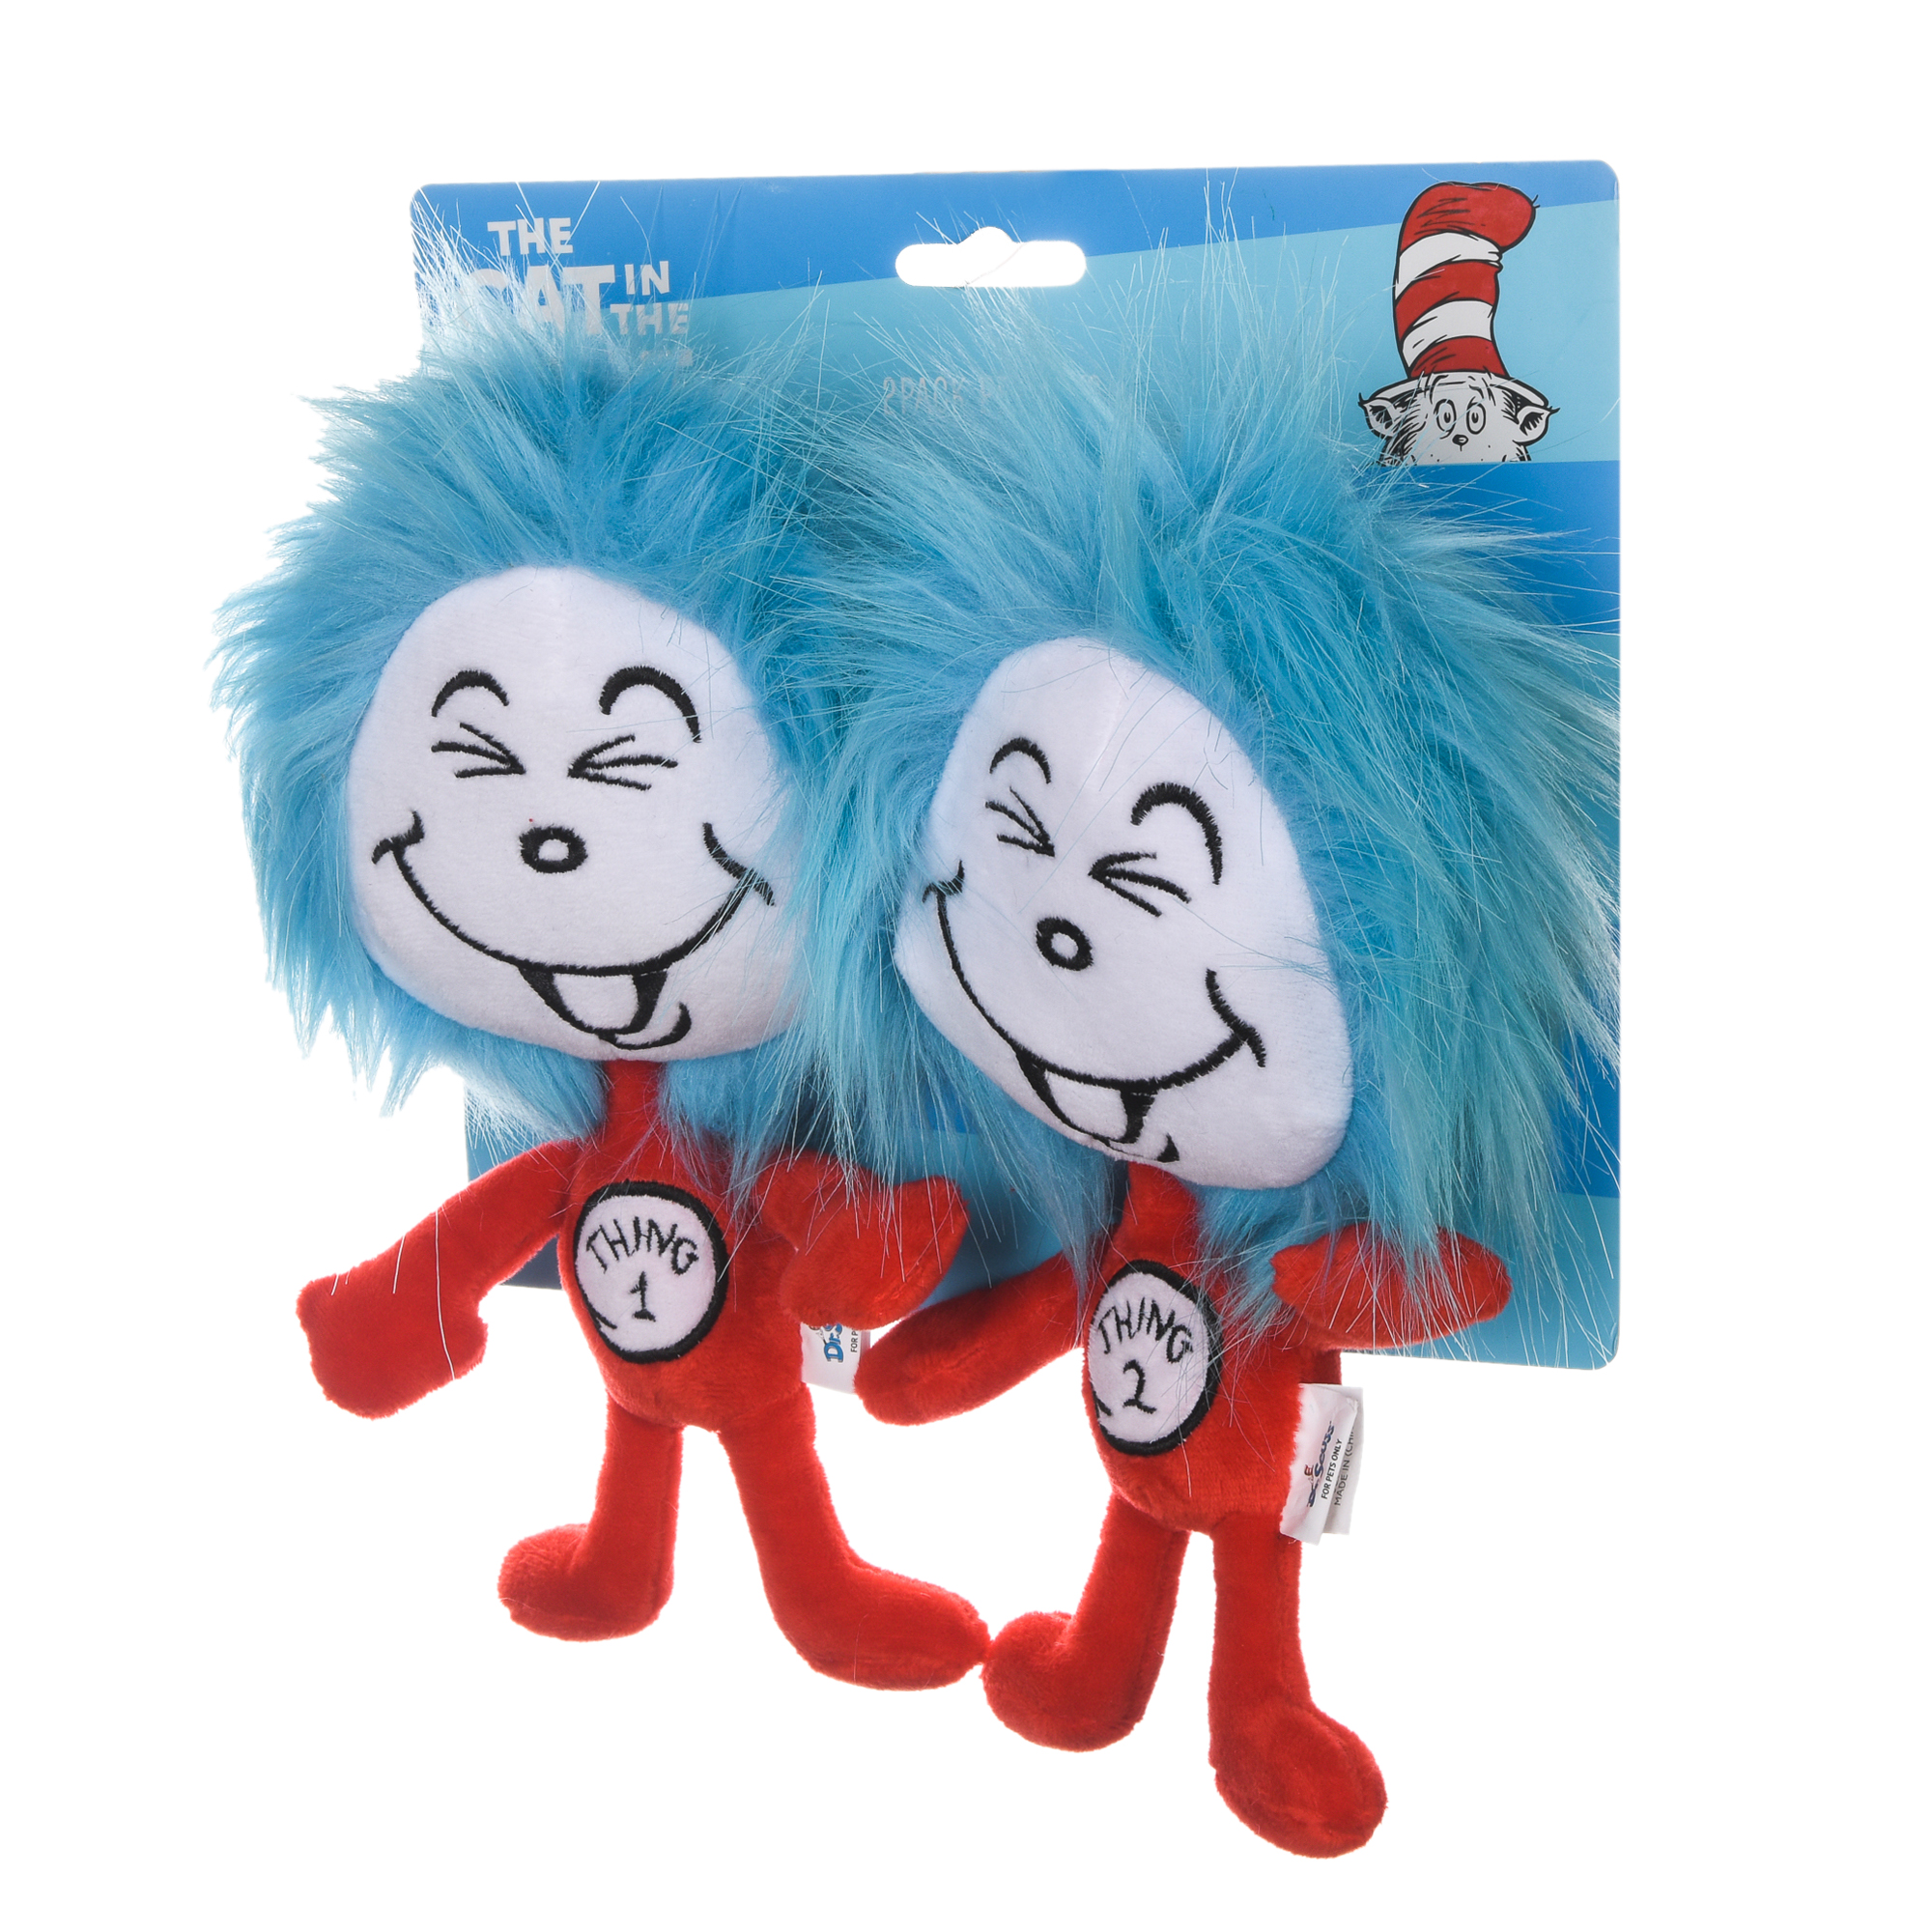 Dr Seuss The Cat in The Hat 3 Piece Cat Toys with Catnip Inside| Cat Feather Toys from Dr Seuss Collection Feather Cat Toys with Characters from Cat in The Hat Including The Cat and Thing 1, 